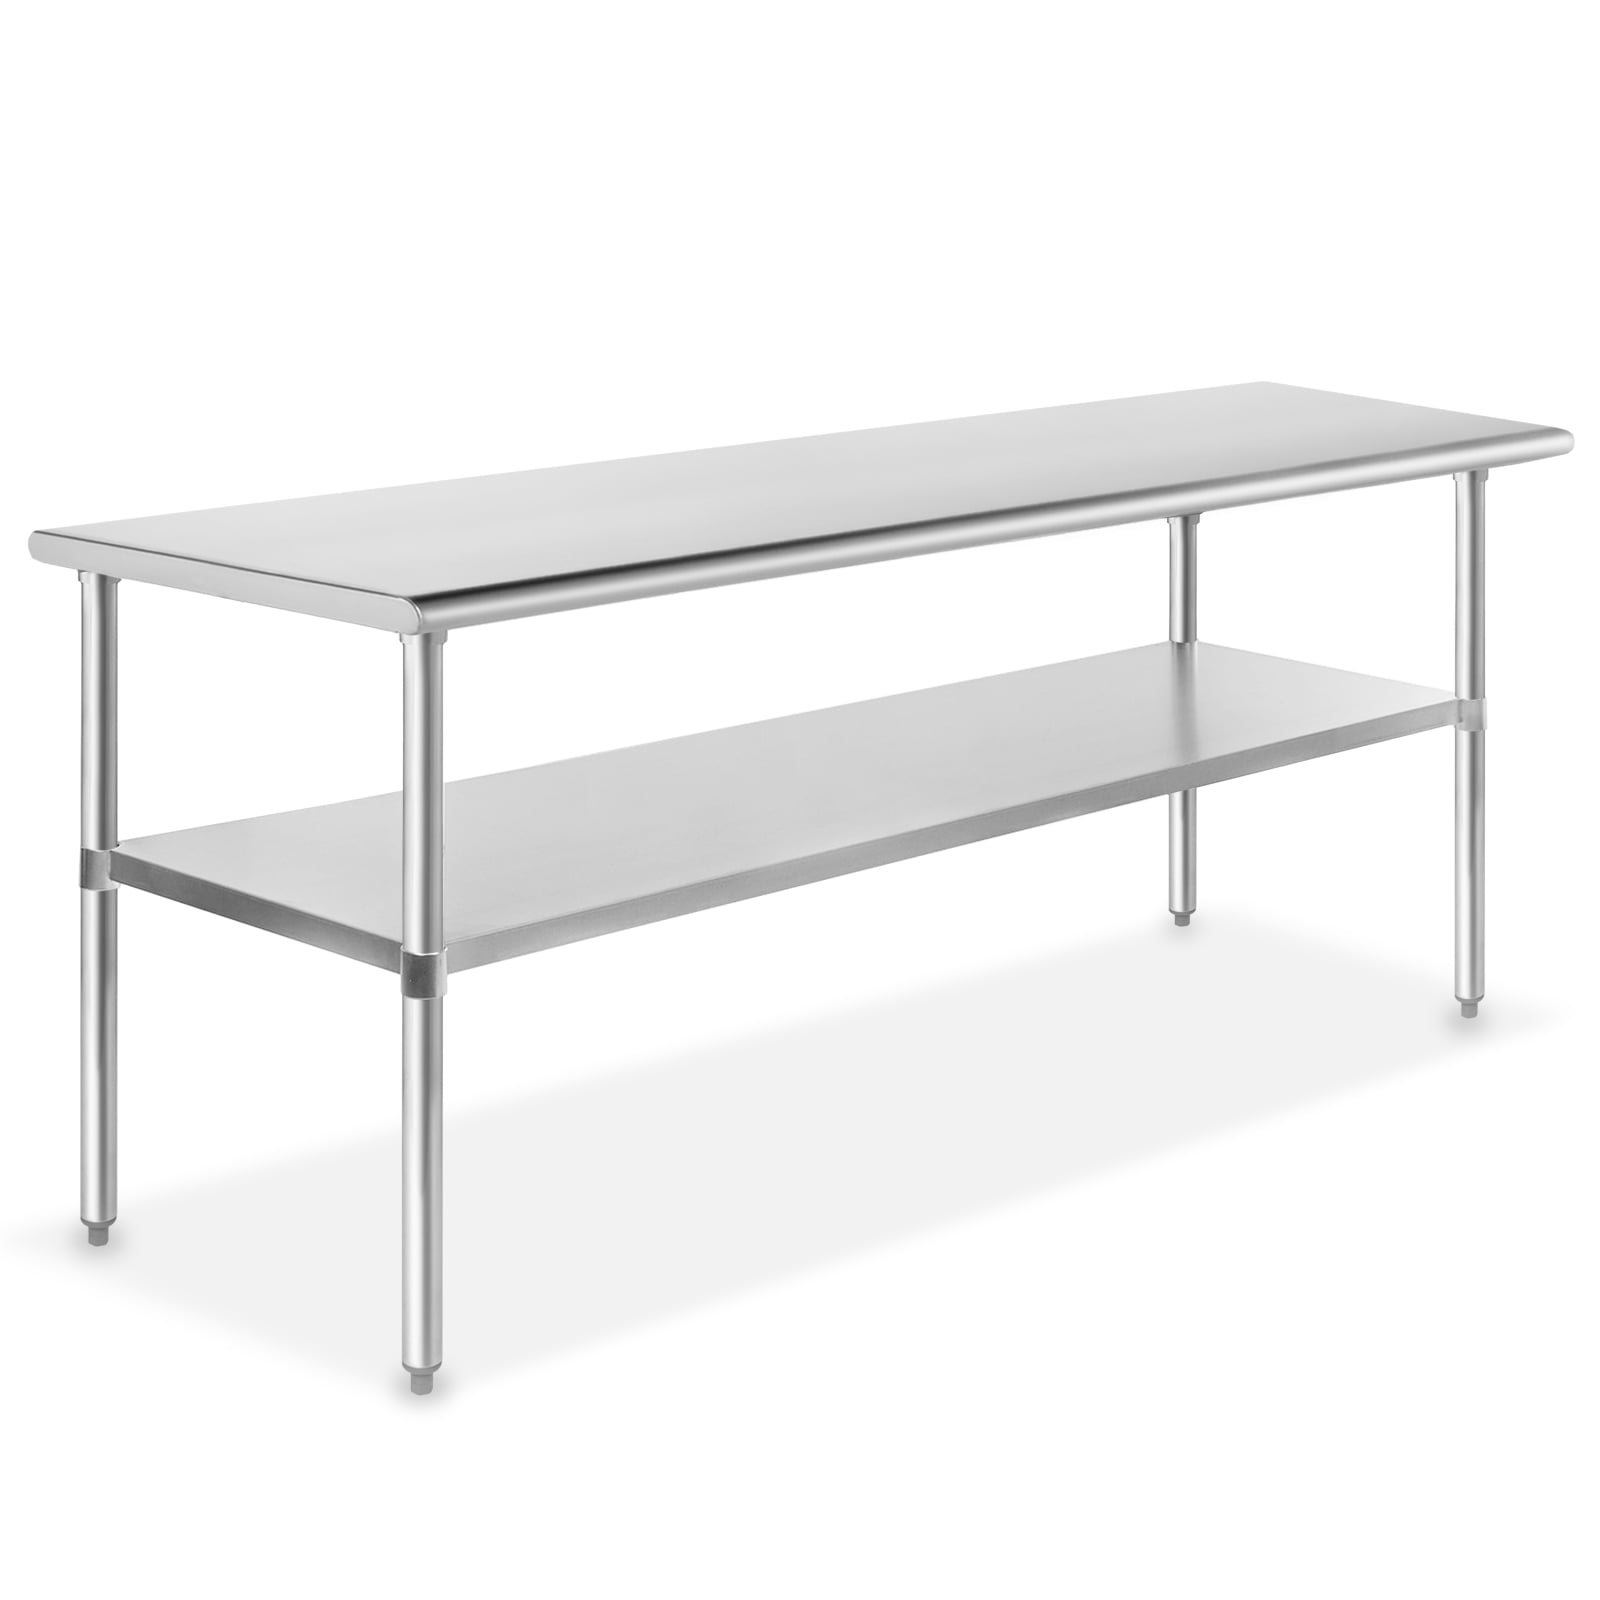 Commercial Kitchen Stainless Steel Double Overshelf for Work Tables !MANY SIZES! 